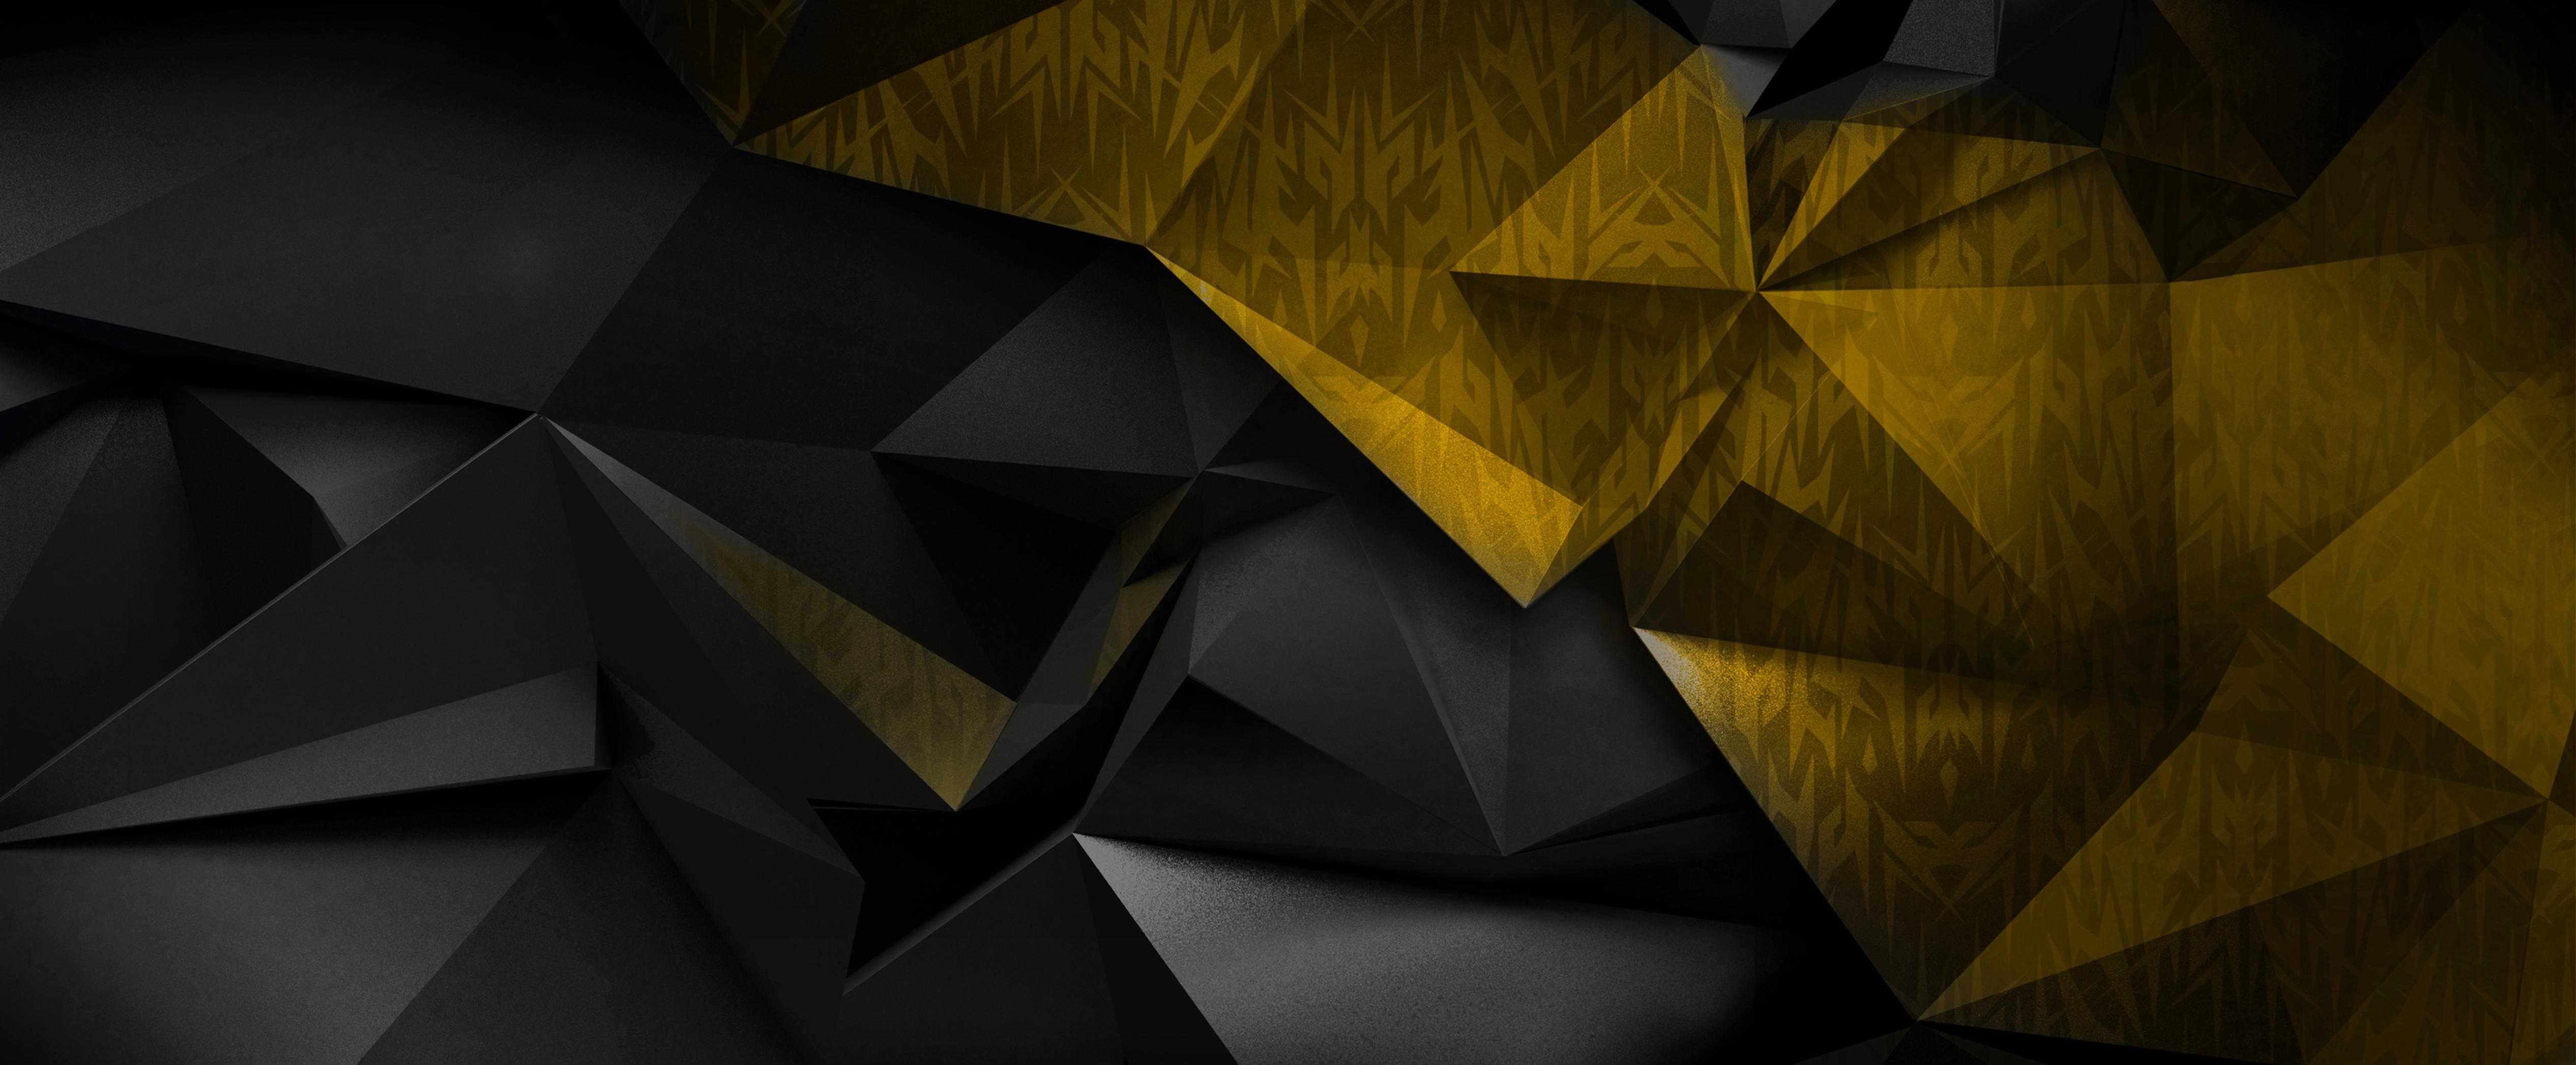 Black and Gold 4k Wallpaper Free Black and Gold 4k Background